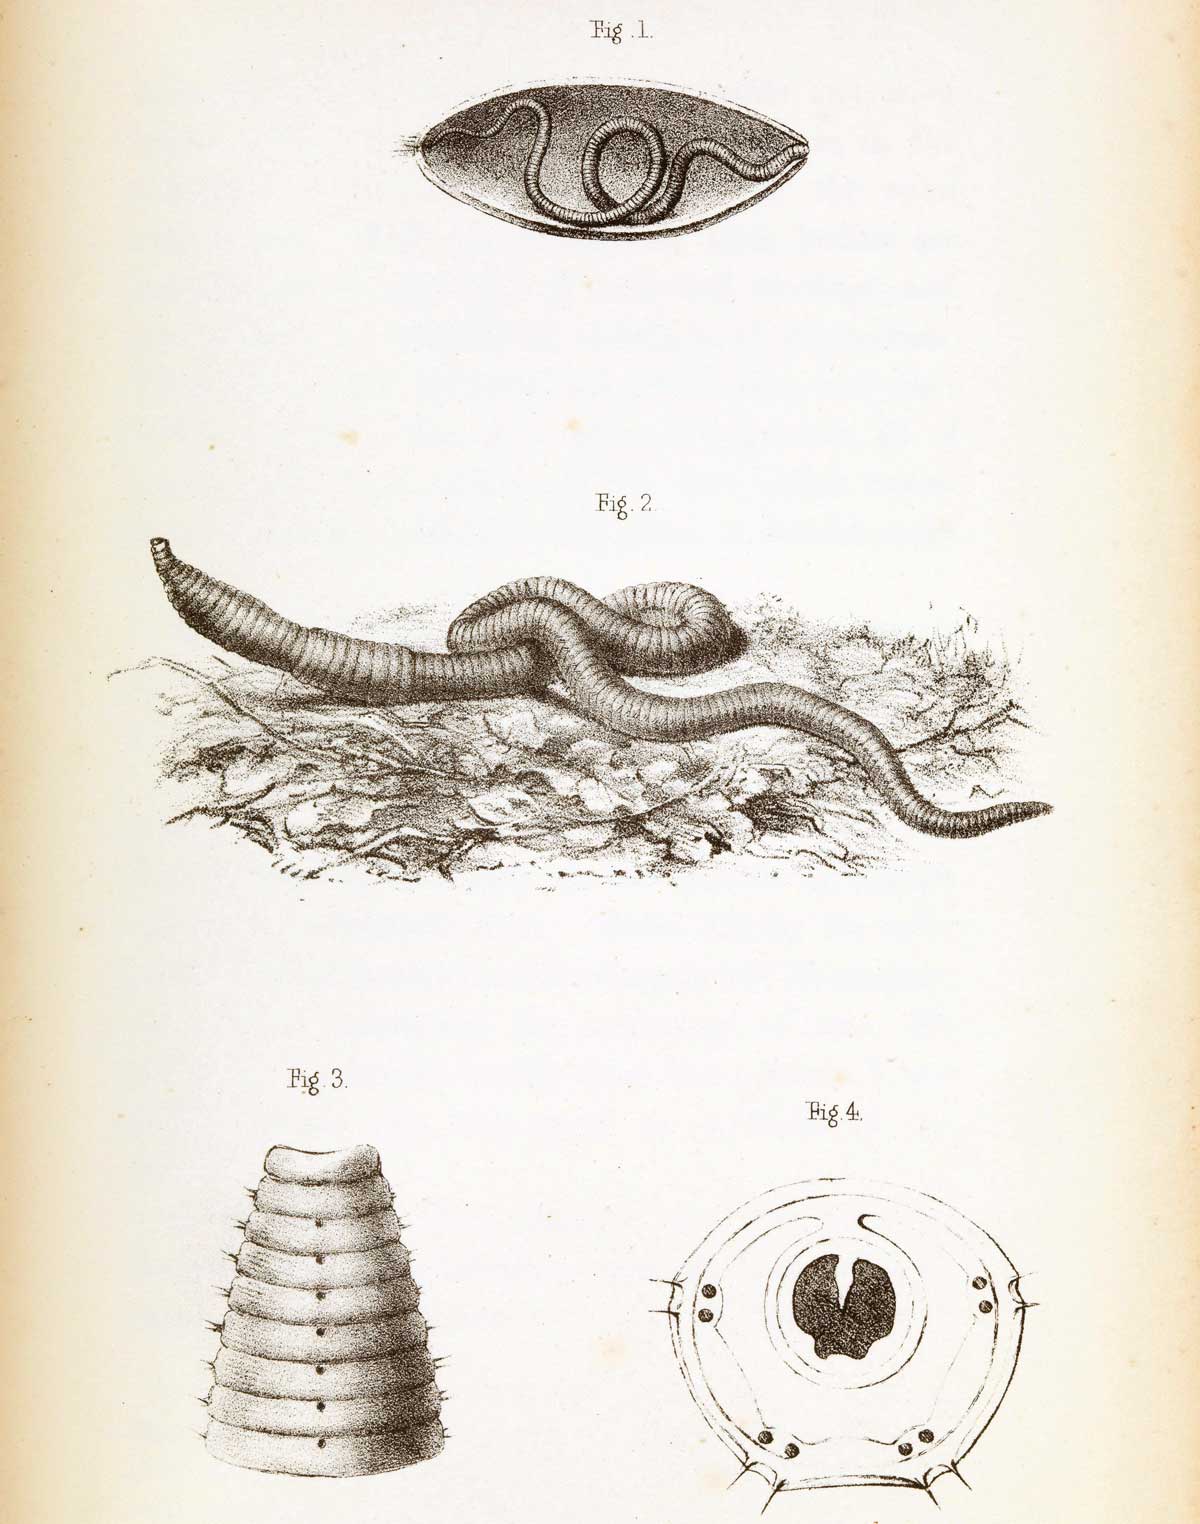 The Earthworm and the Common Housefly, by James Samuelson, 1858. Courtesy Wellcome Images.